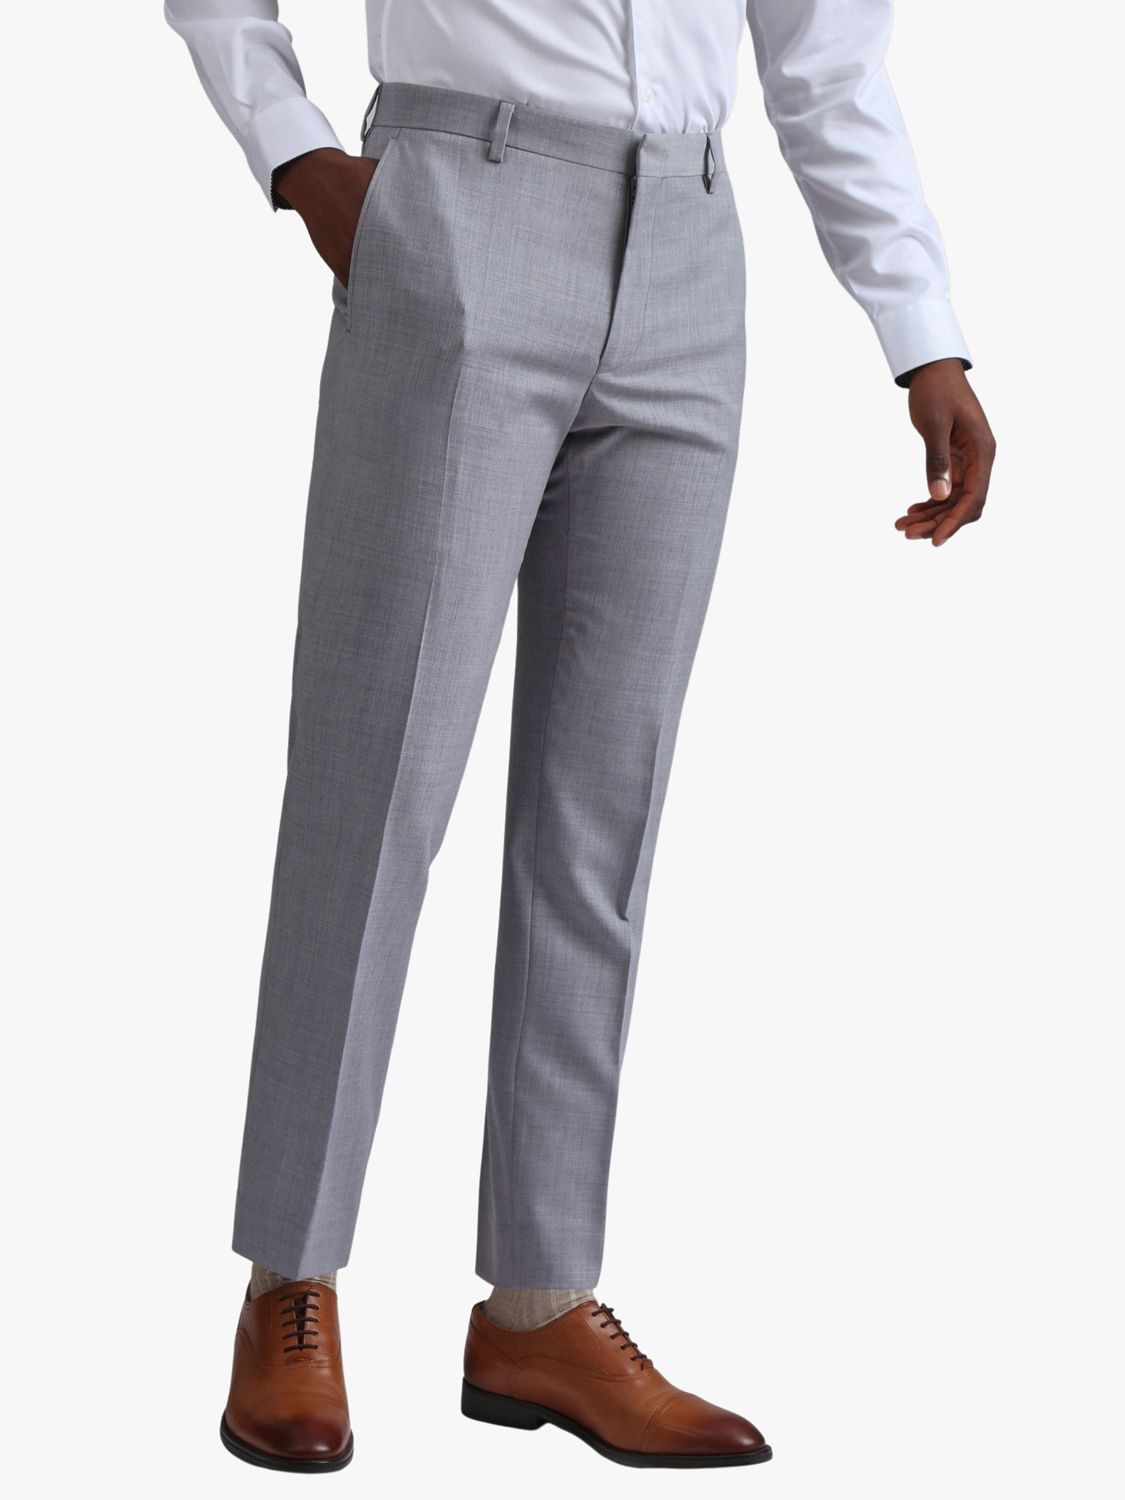 Ted Baker Denali Cool Wool Blend Suit Trousers, Grey, 38R